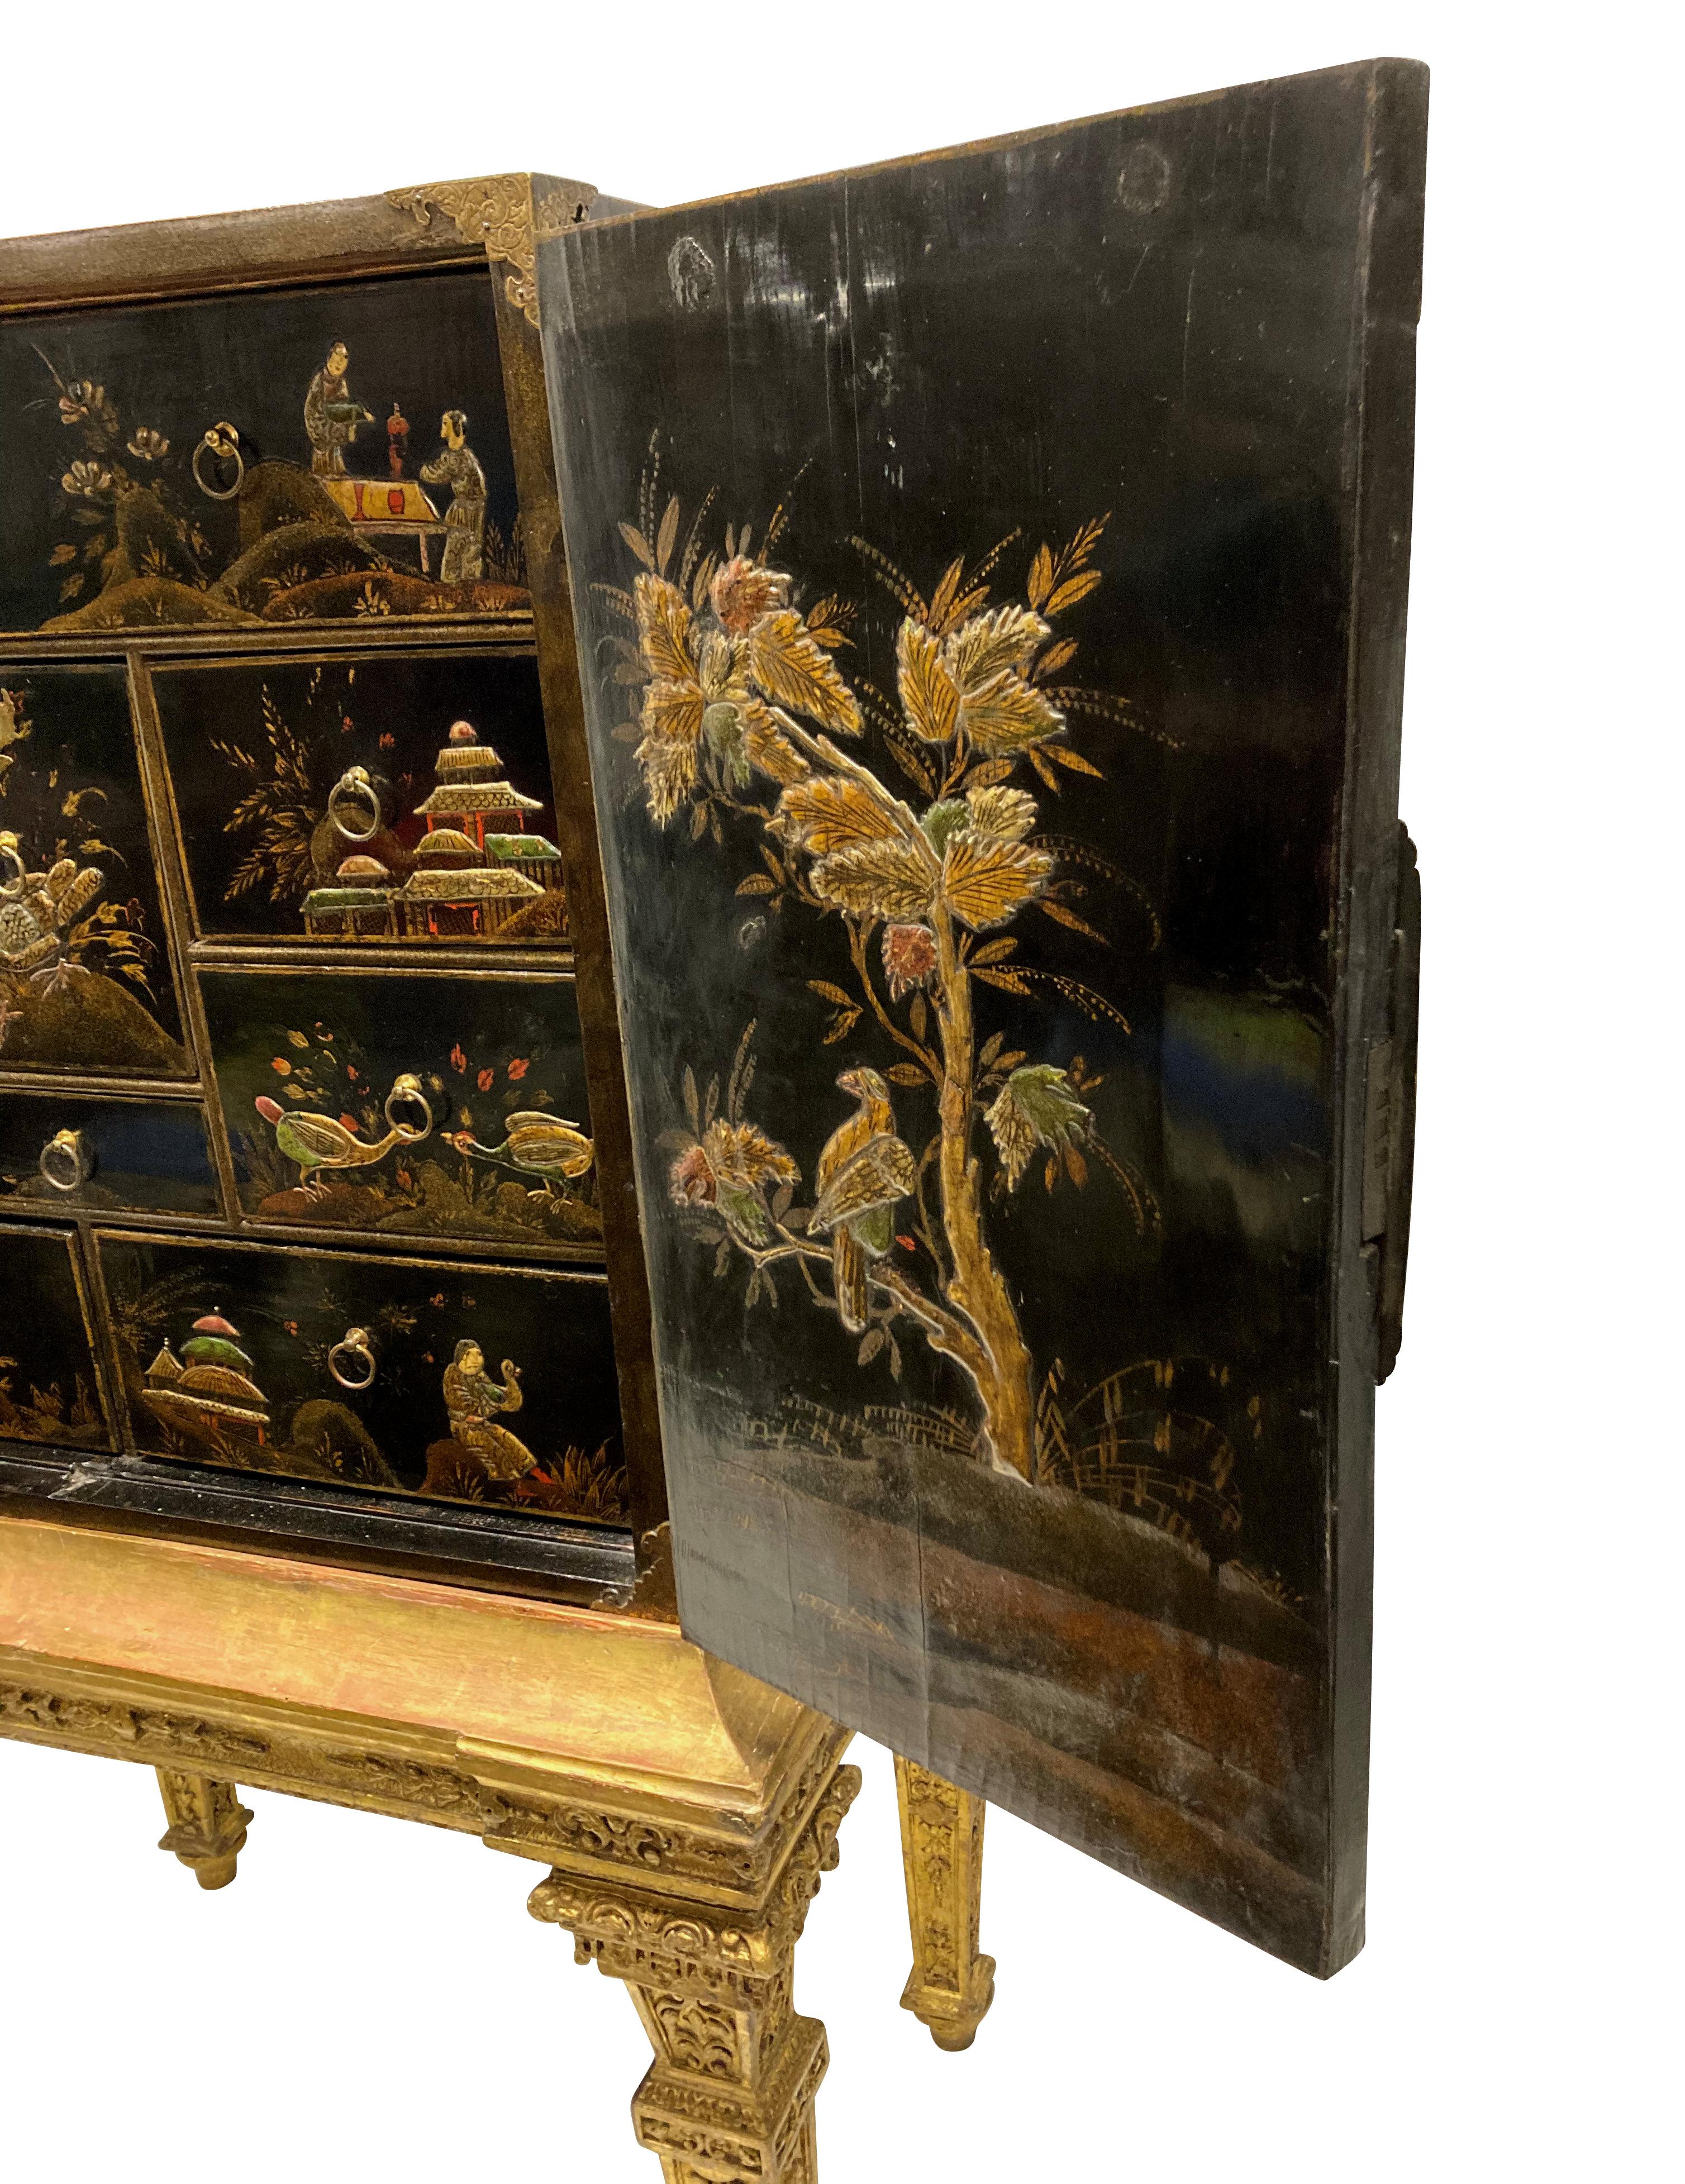 Late 17th Century Fine William & Mary Chinoiserie Cabinet on Stand